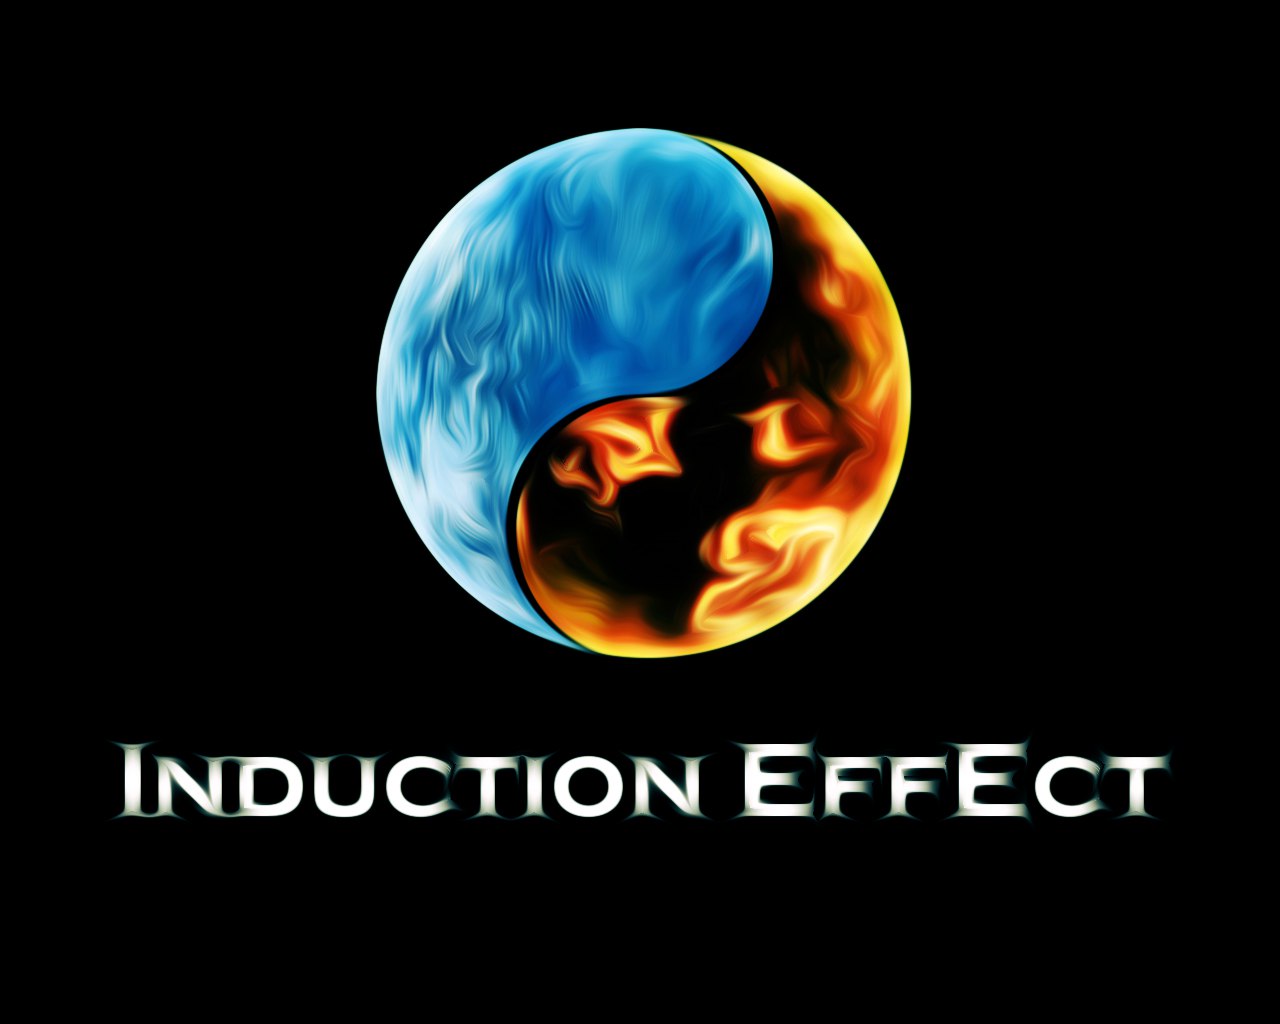 INDUCTION EFFECT